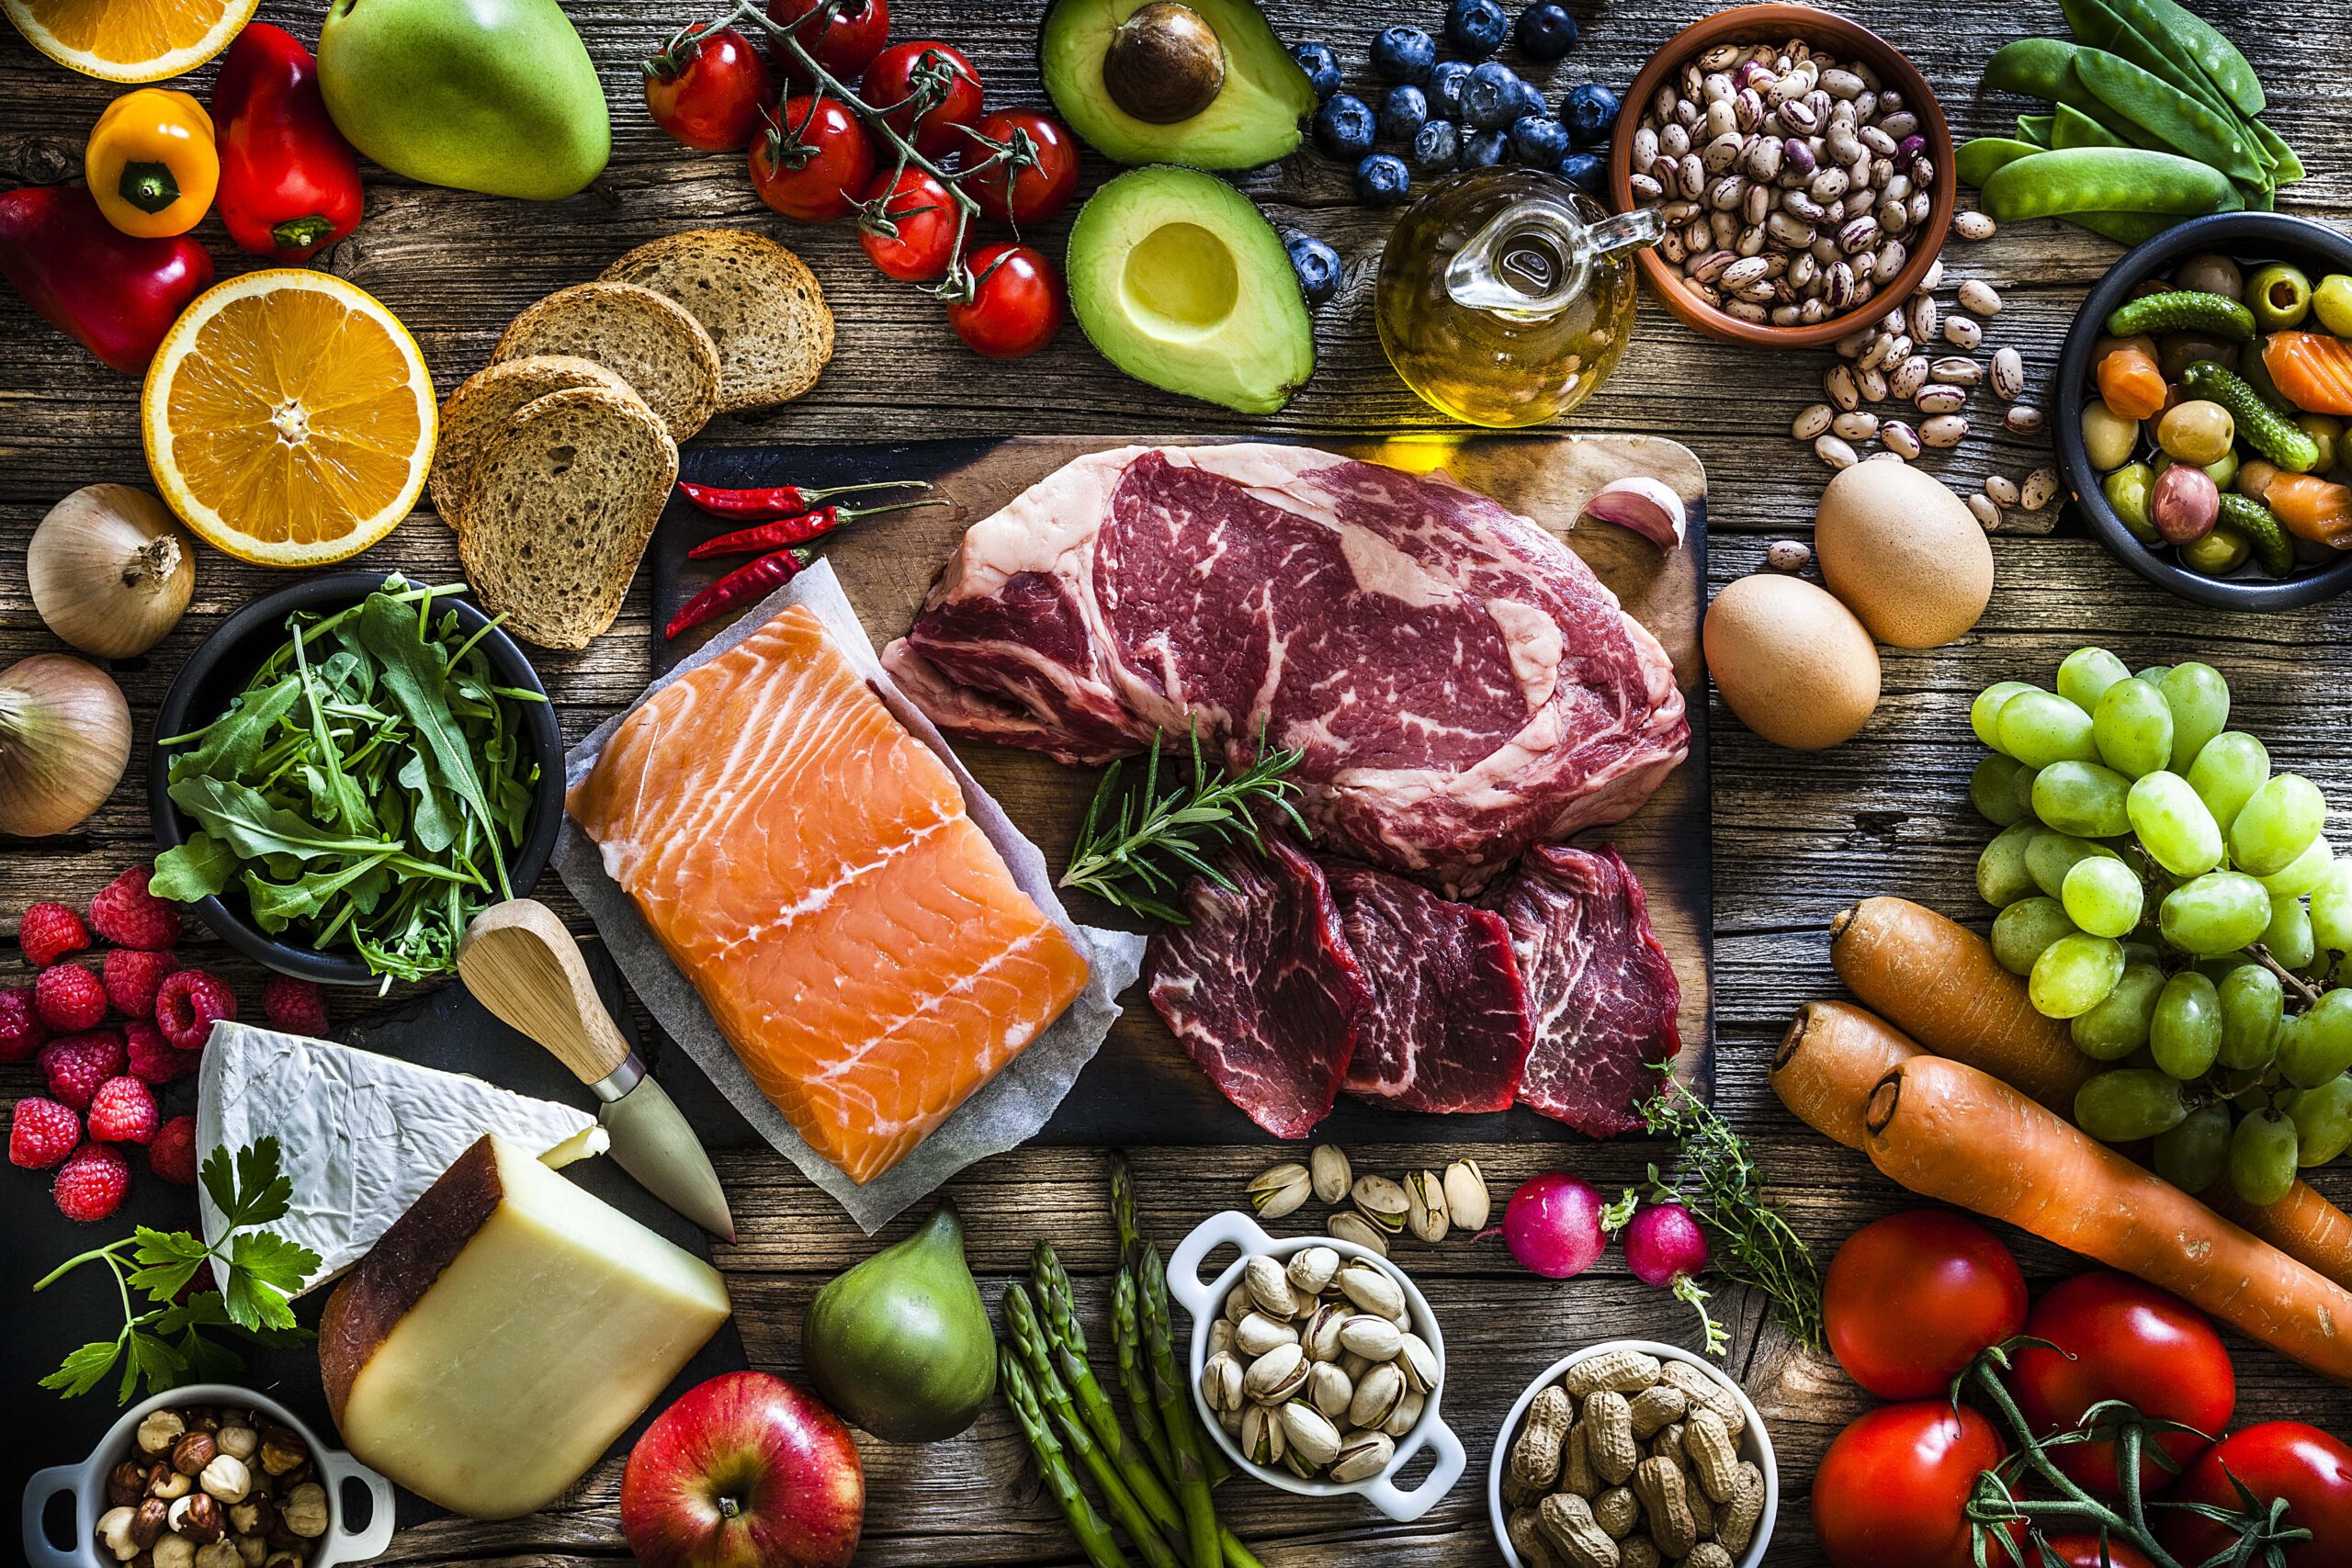 What’s the BEST diet for fat loss?